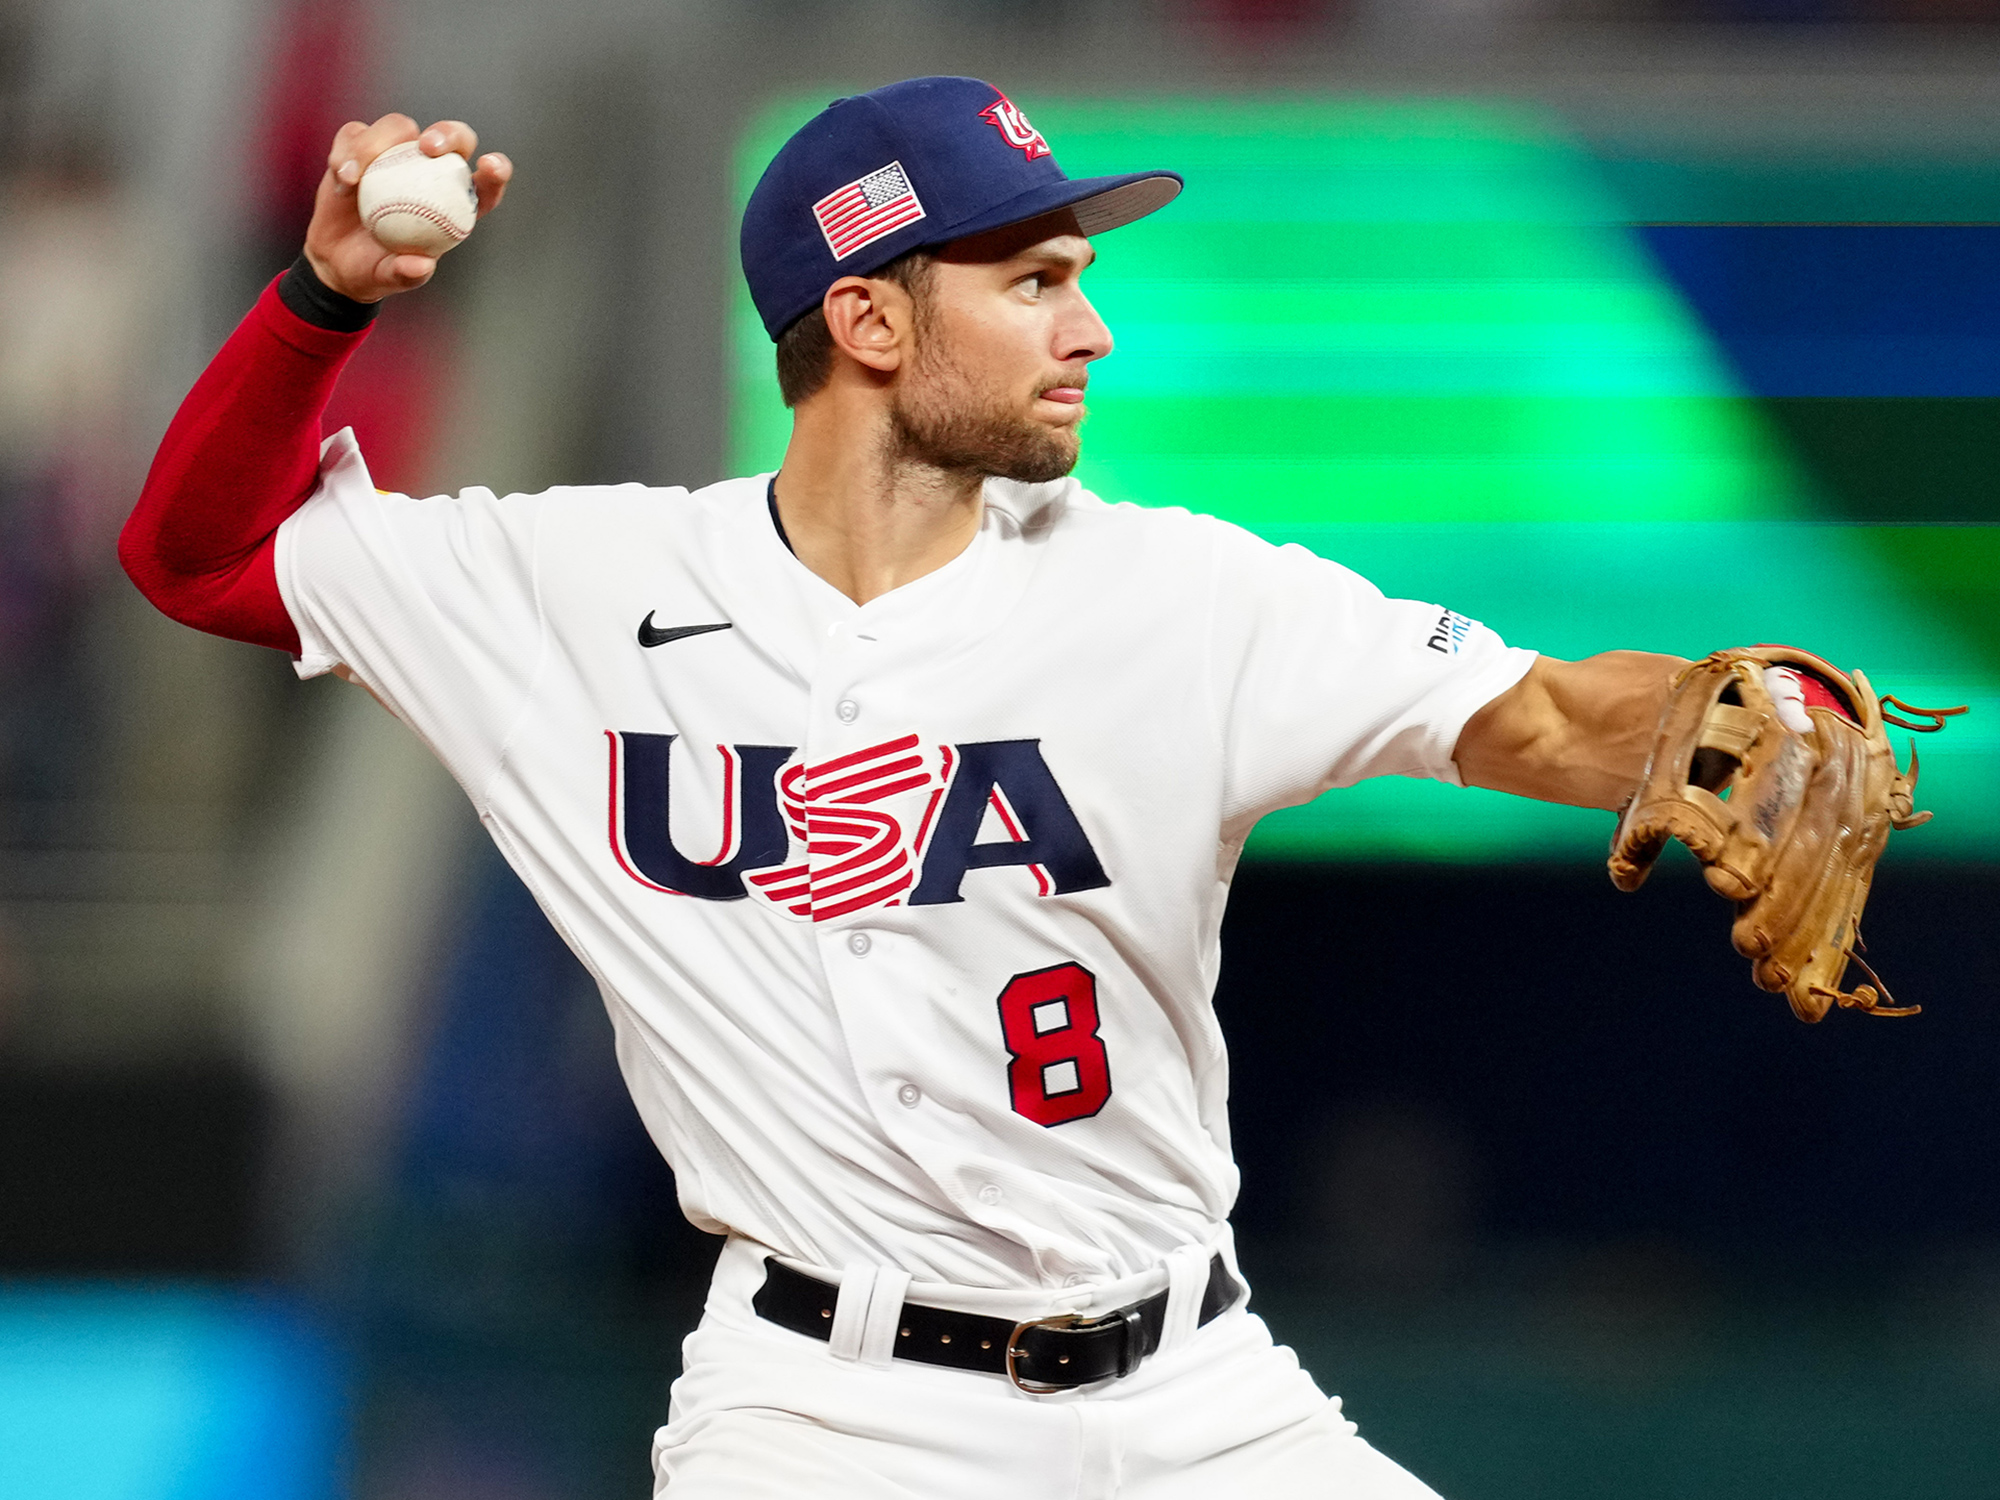 Trea Turner #8 of Team USA throws to first in the eighth inning during the 2023 World Baseball Classic Semifinal game between Team Cuba and Team USA at loanDepot Park on Sunday, March 19, 2023 in Miami, Florida